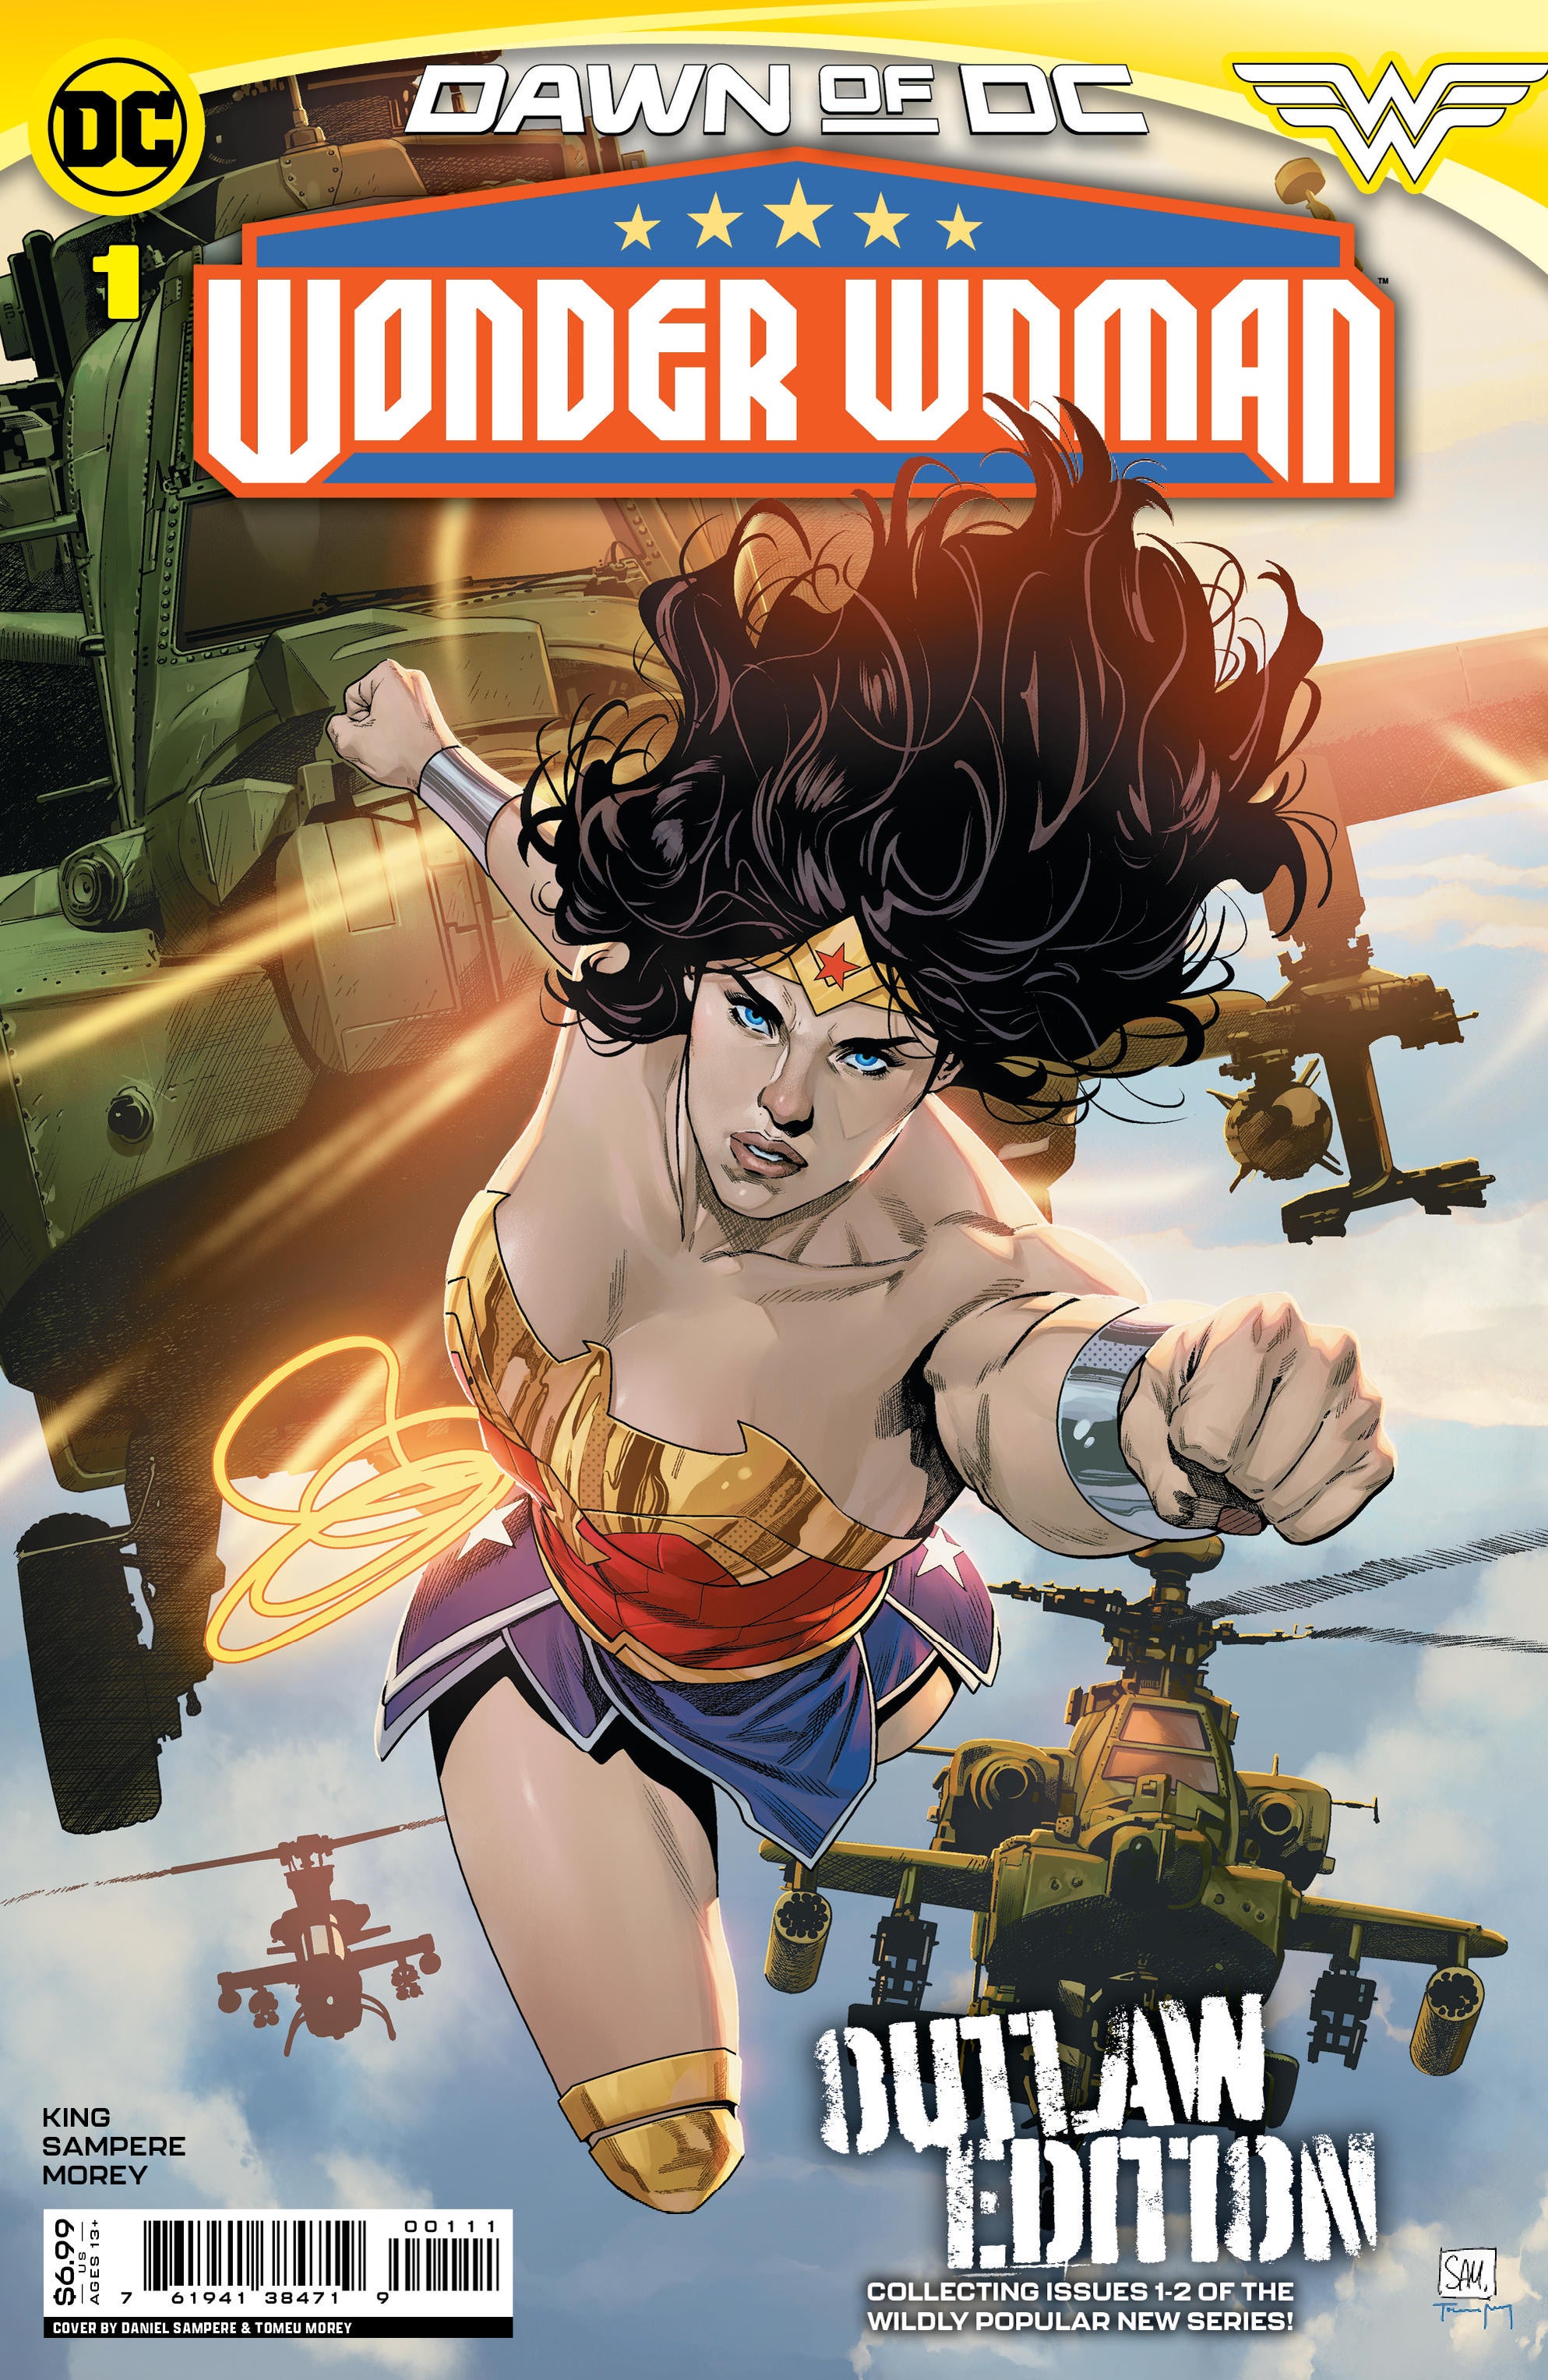 DC Reveals Wonder Woman Outlaw Edition and Issue #3 Preview